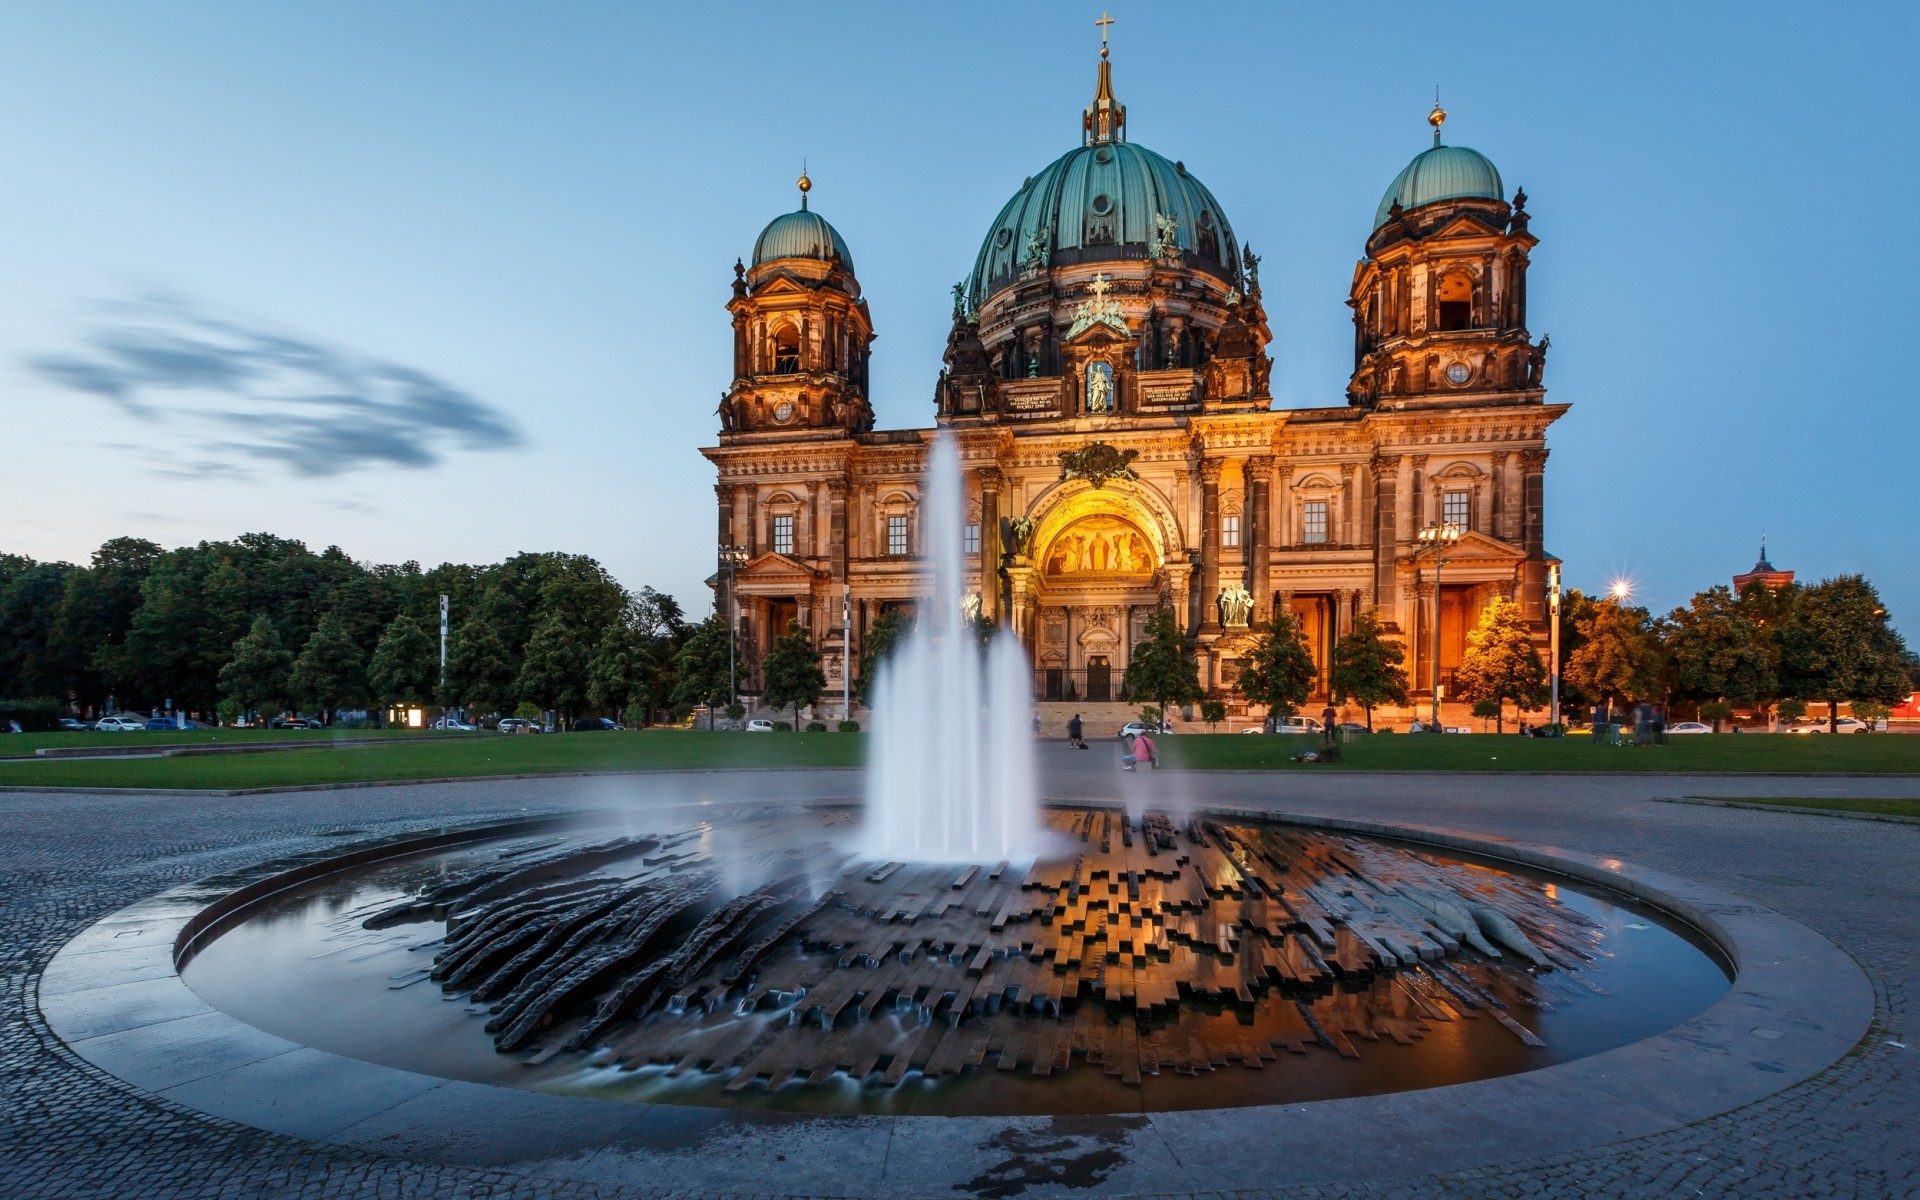 architecture, Castle, Water, Clouds, Berlin, Germany, Fountain, Cathedral, Trees, Field, Dome, Sculpture, Long exposure, Lights Wallpaper